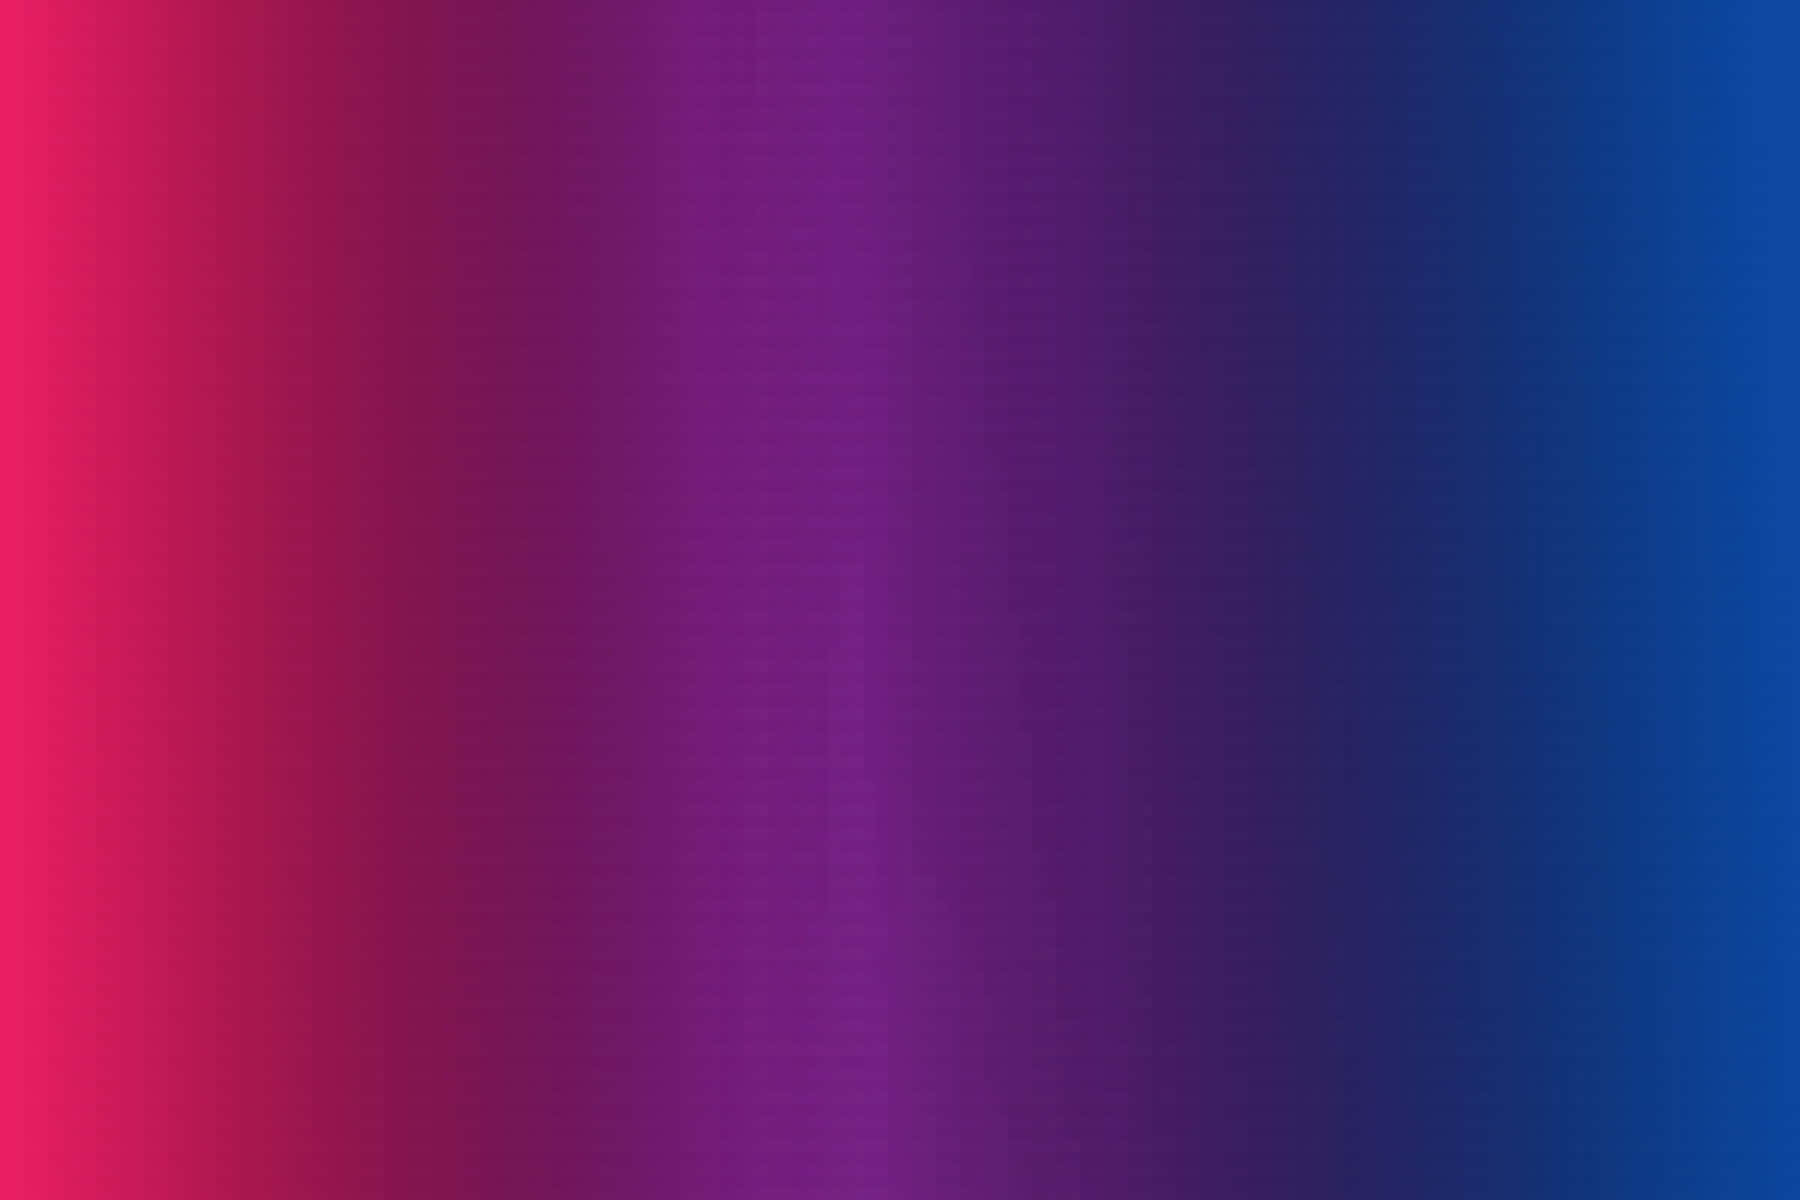 A Purple And Blue Gradient Background